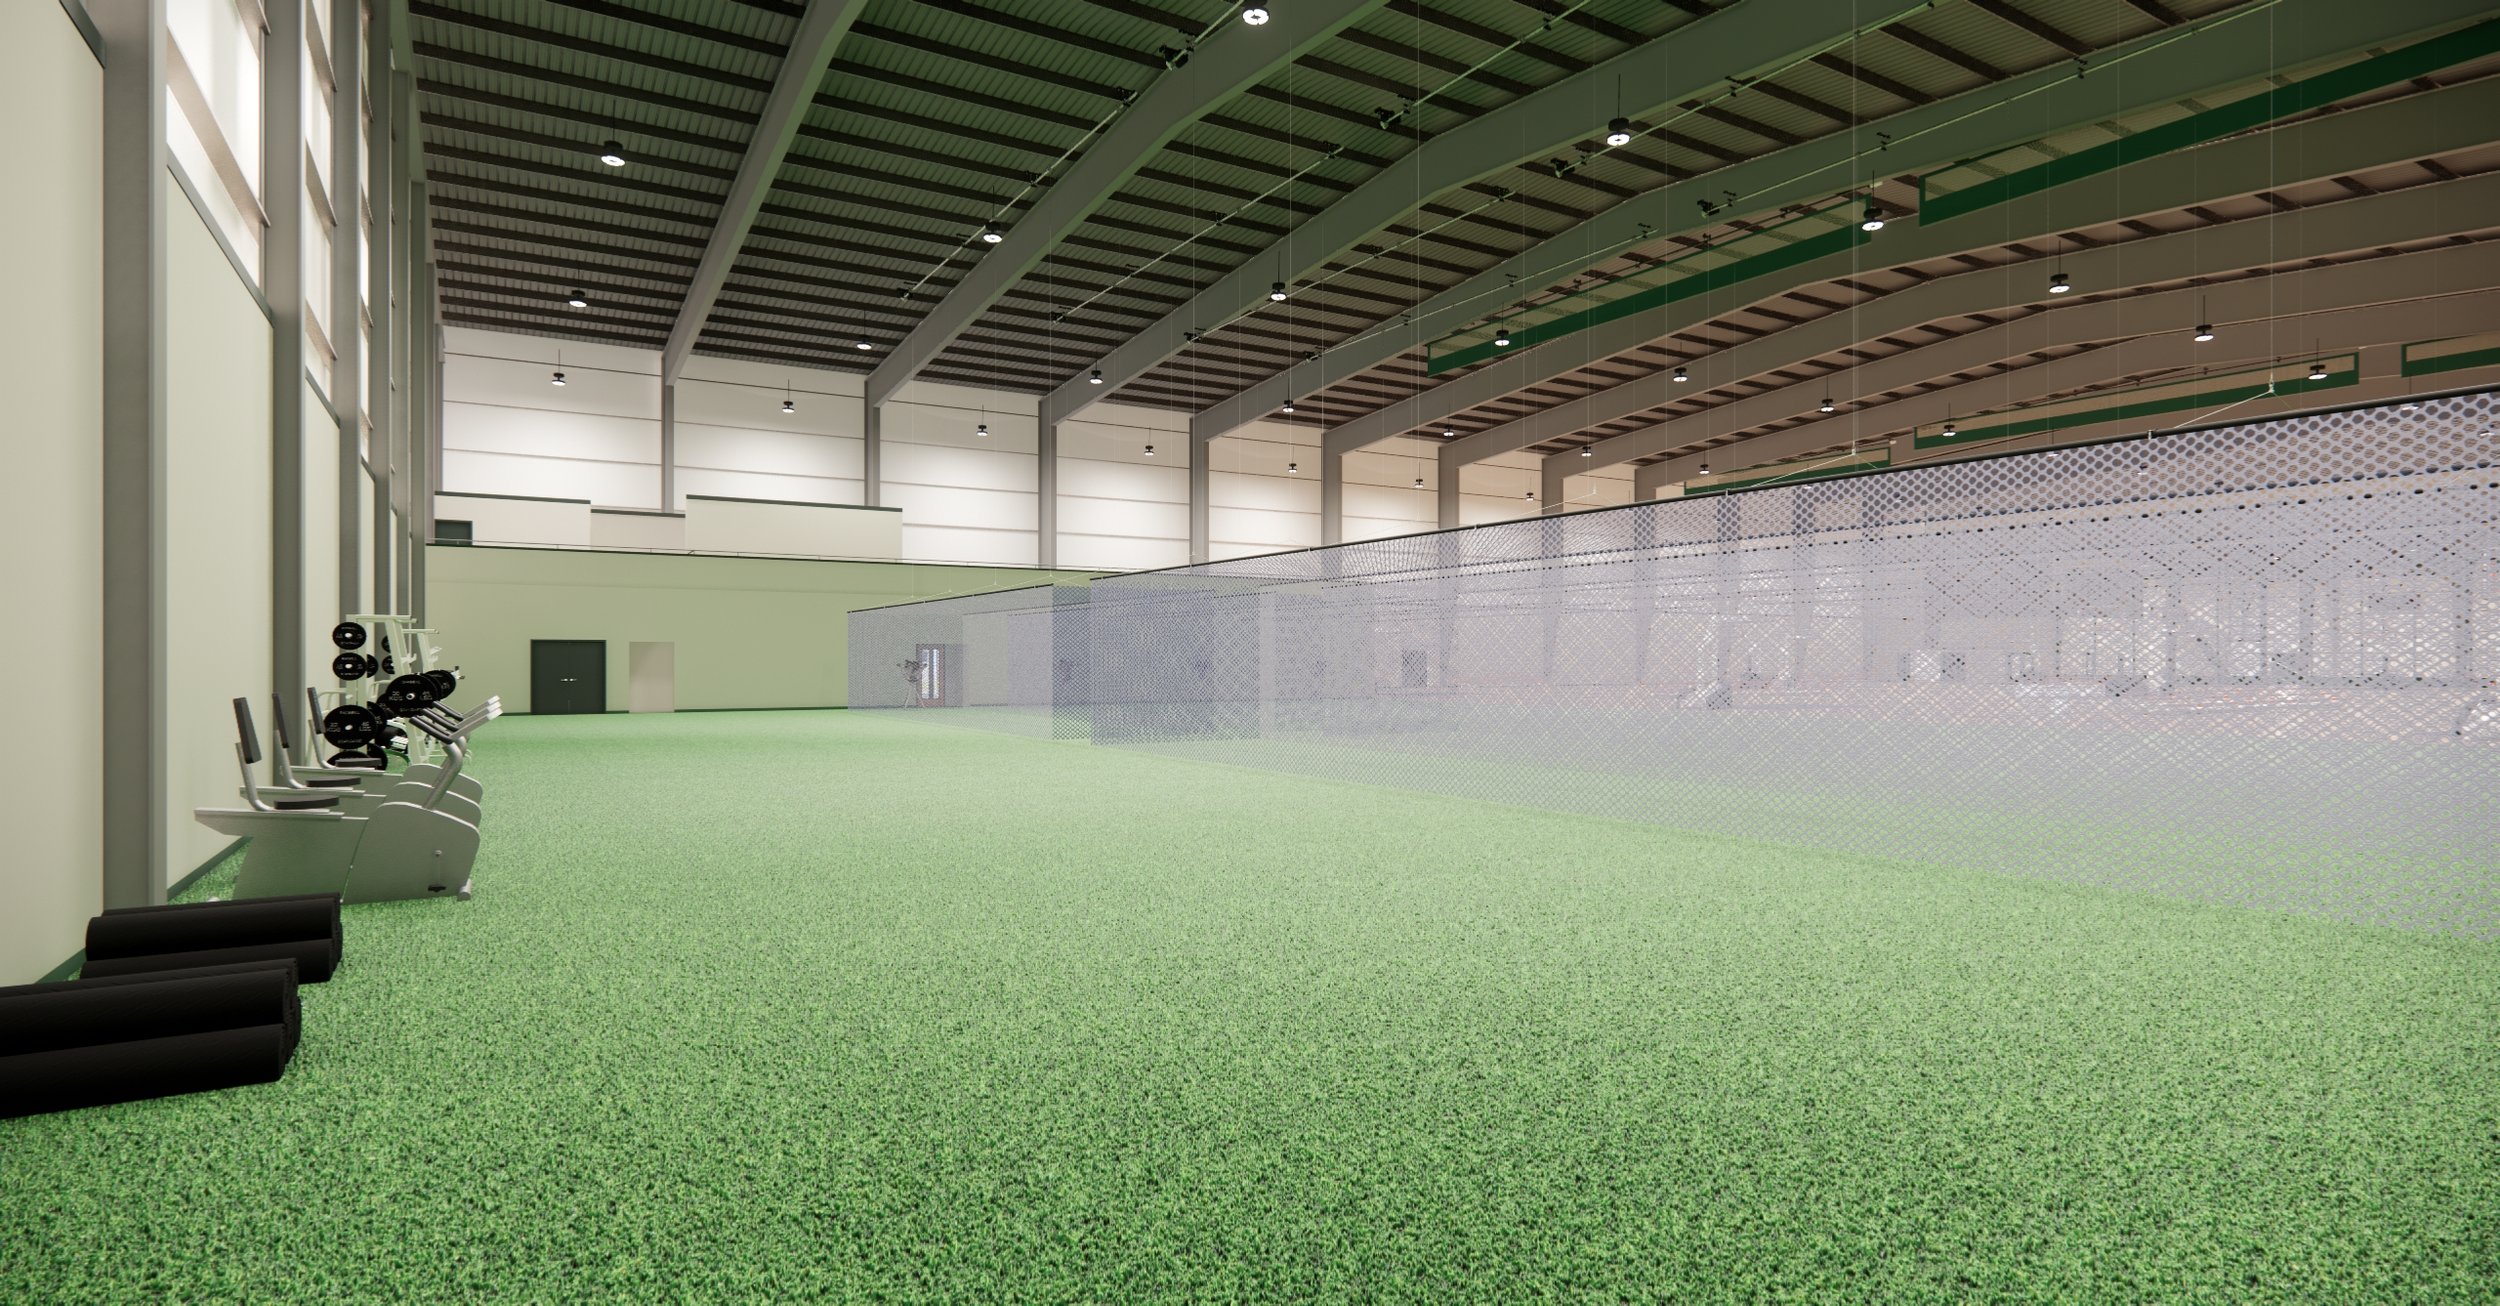 Existing Building - New Sports Performance &amp; Batting Cages